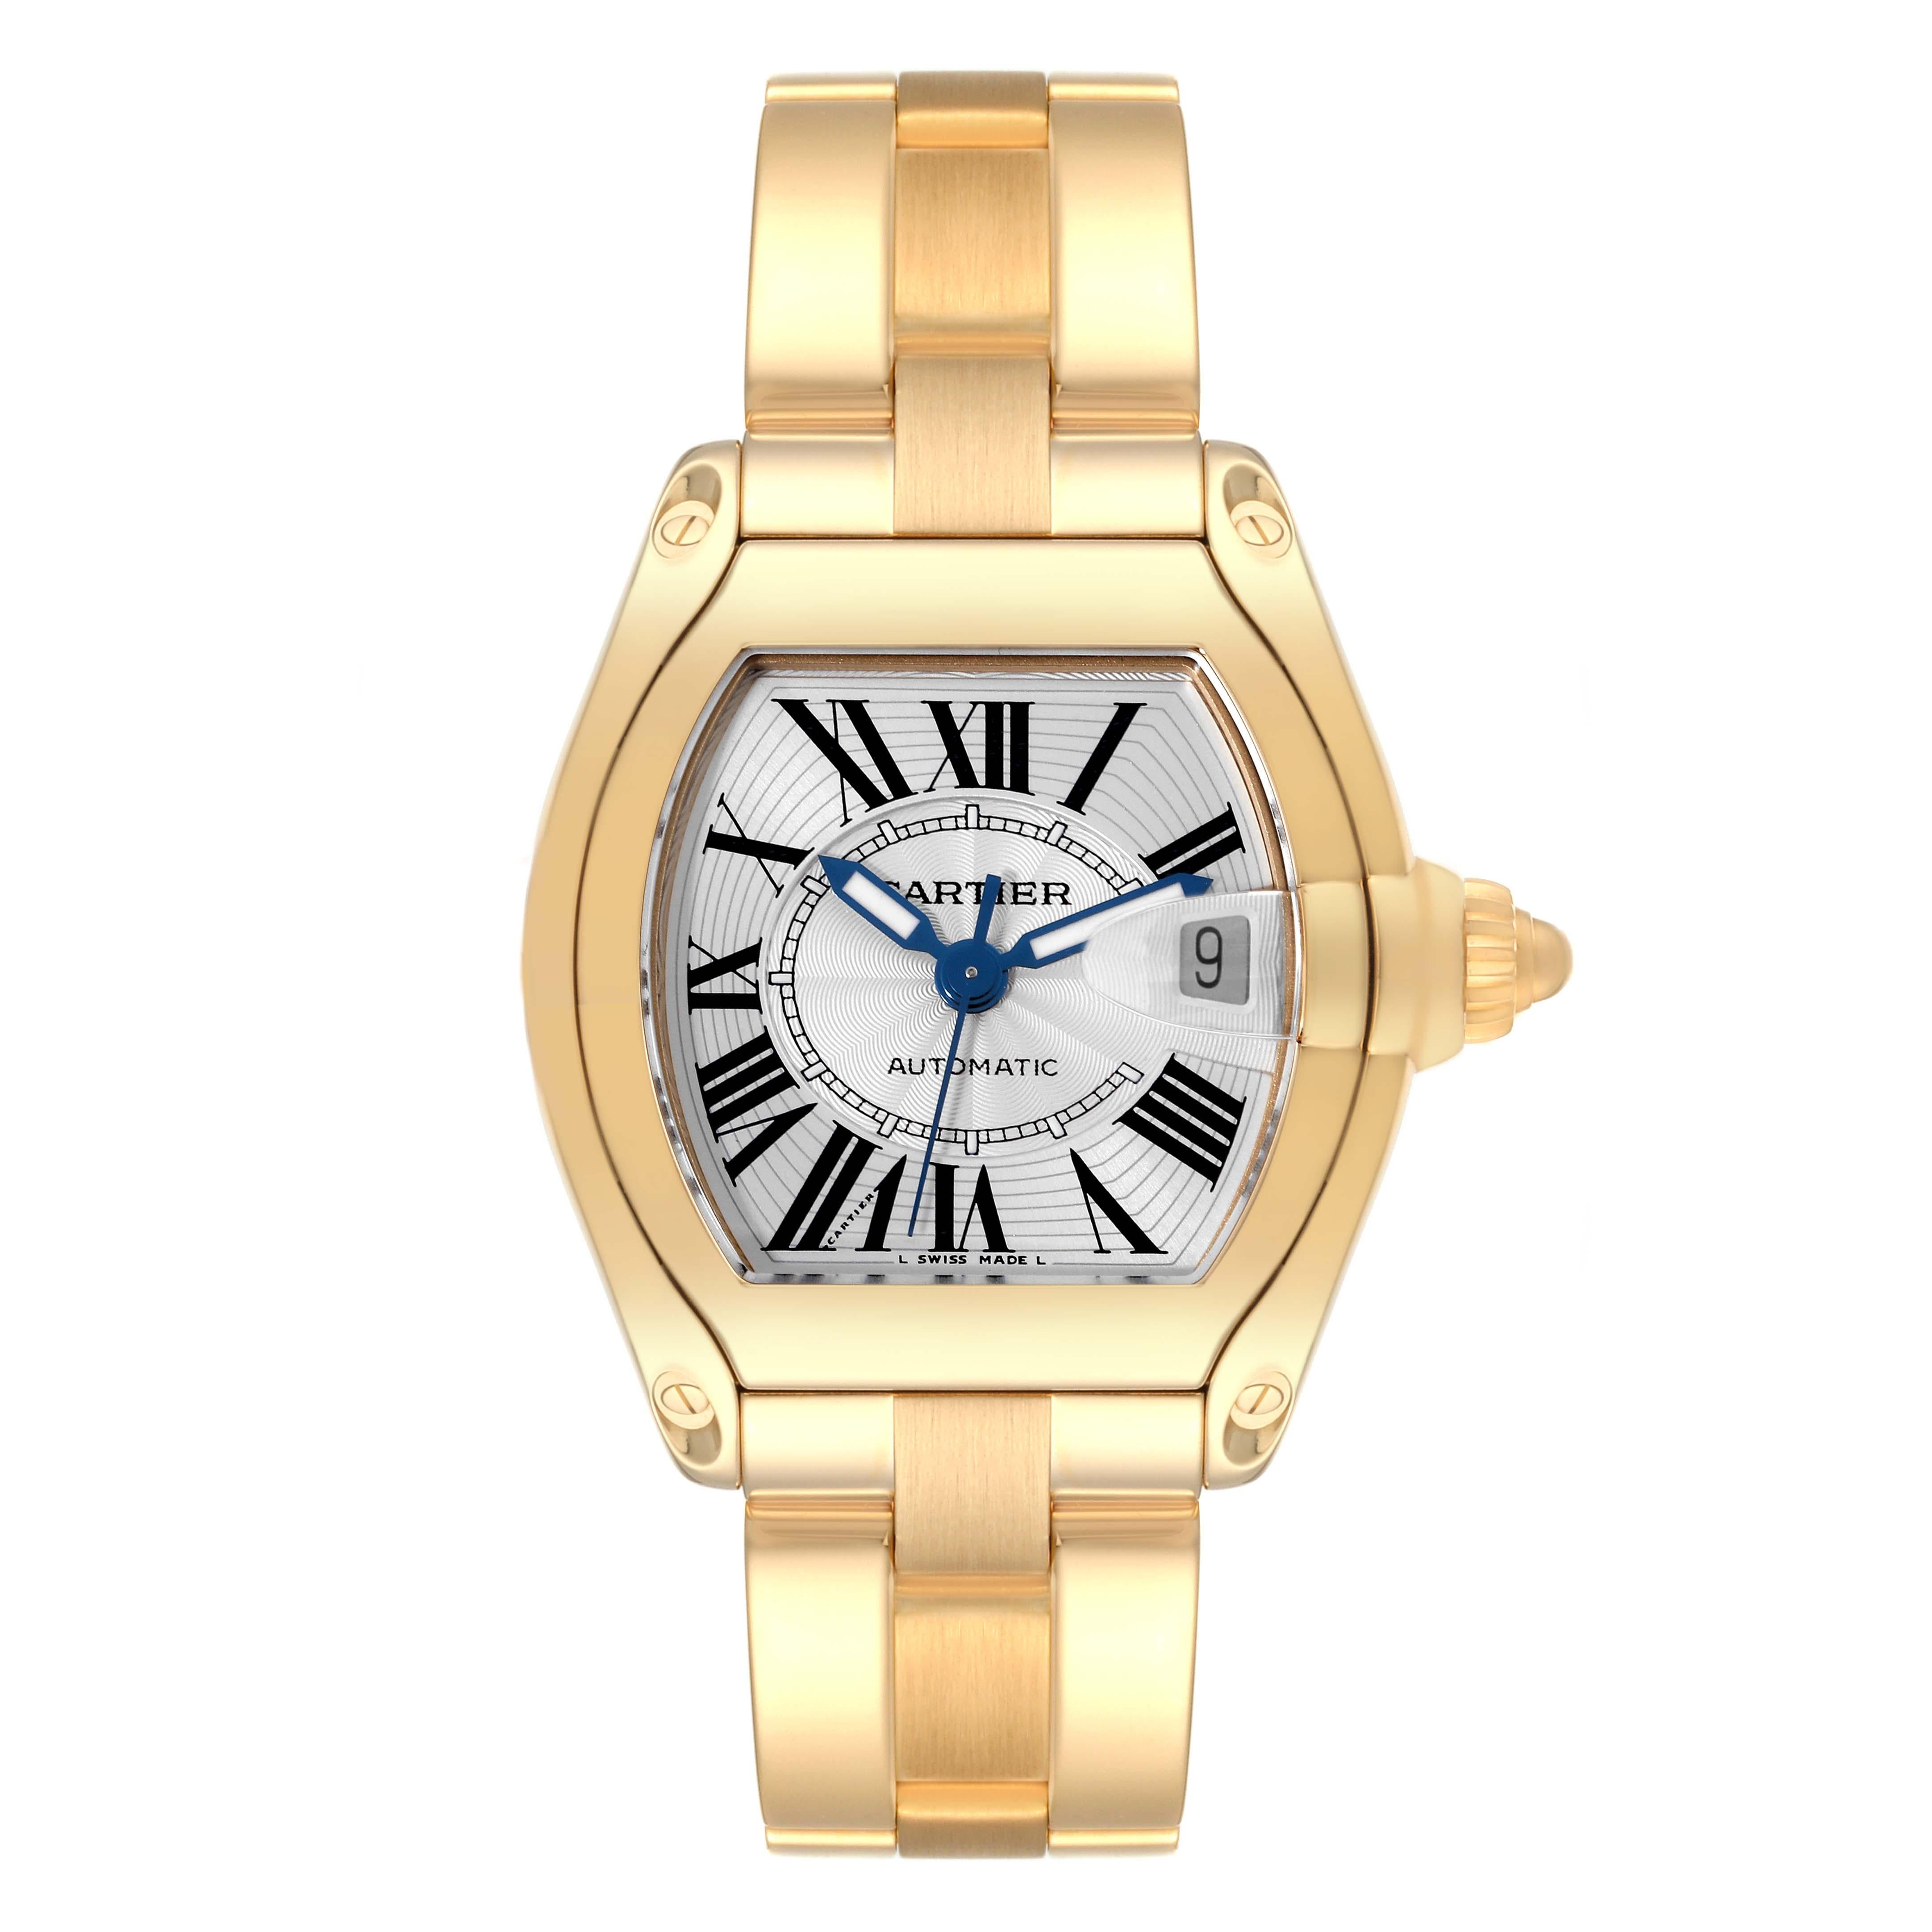 Cartier Roadster Silver Dial 18K Yellow Gold Large Mens Watch W62005V1. Automatic self-winding movement. 18K yellow gold tonneau shaped case 37 x 44 mm. . Scratch resistant sapphire crystal with cyclops magnifying glass. Silver sunray dial with